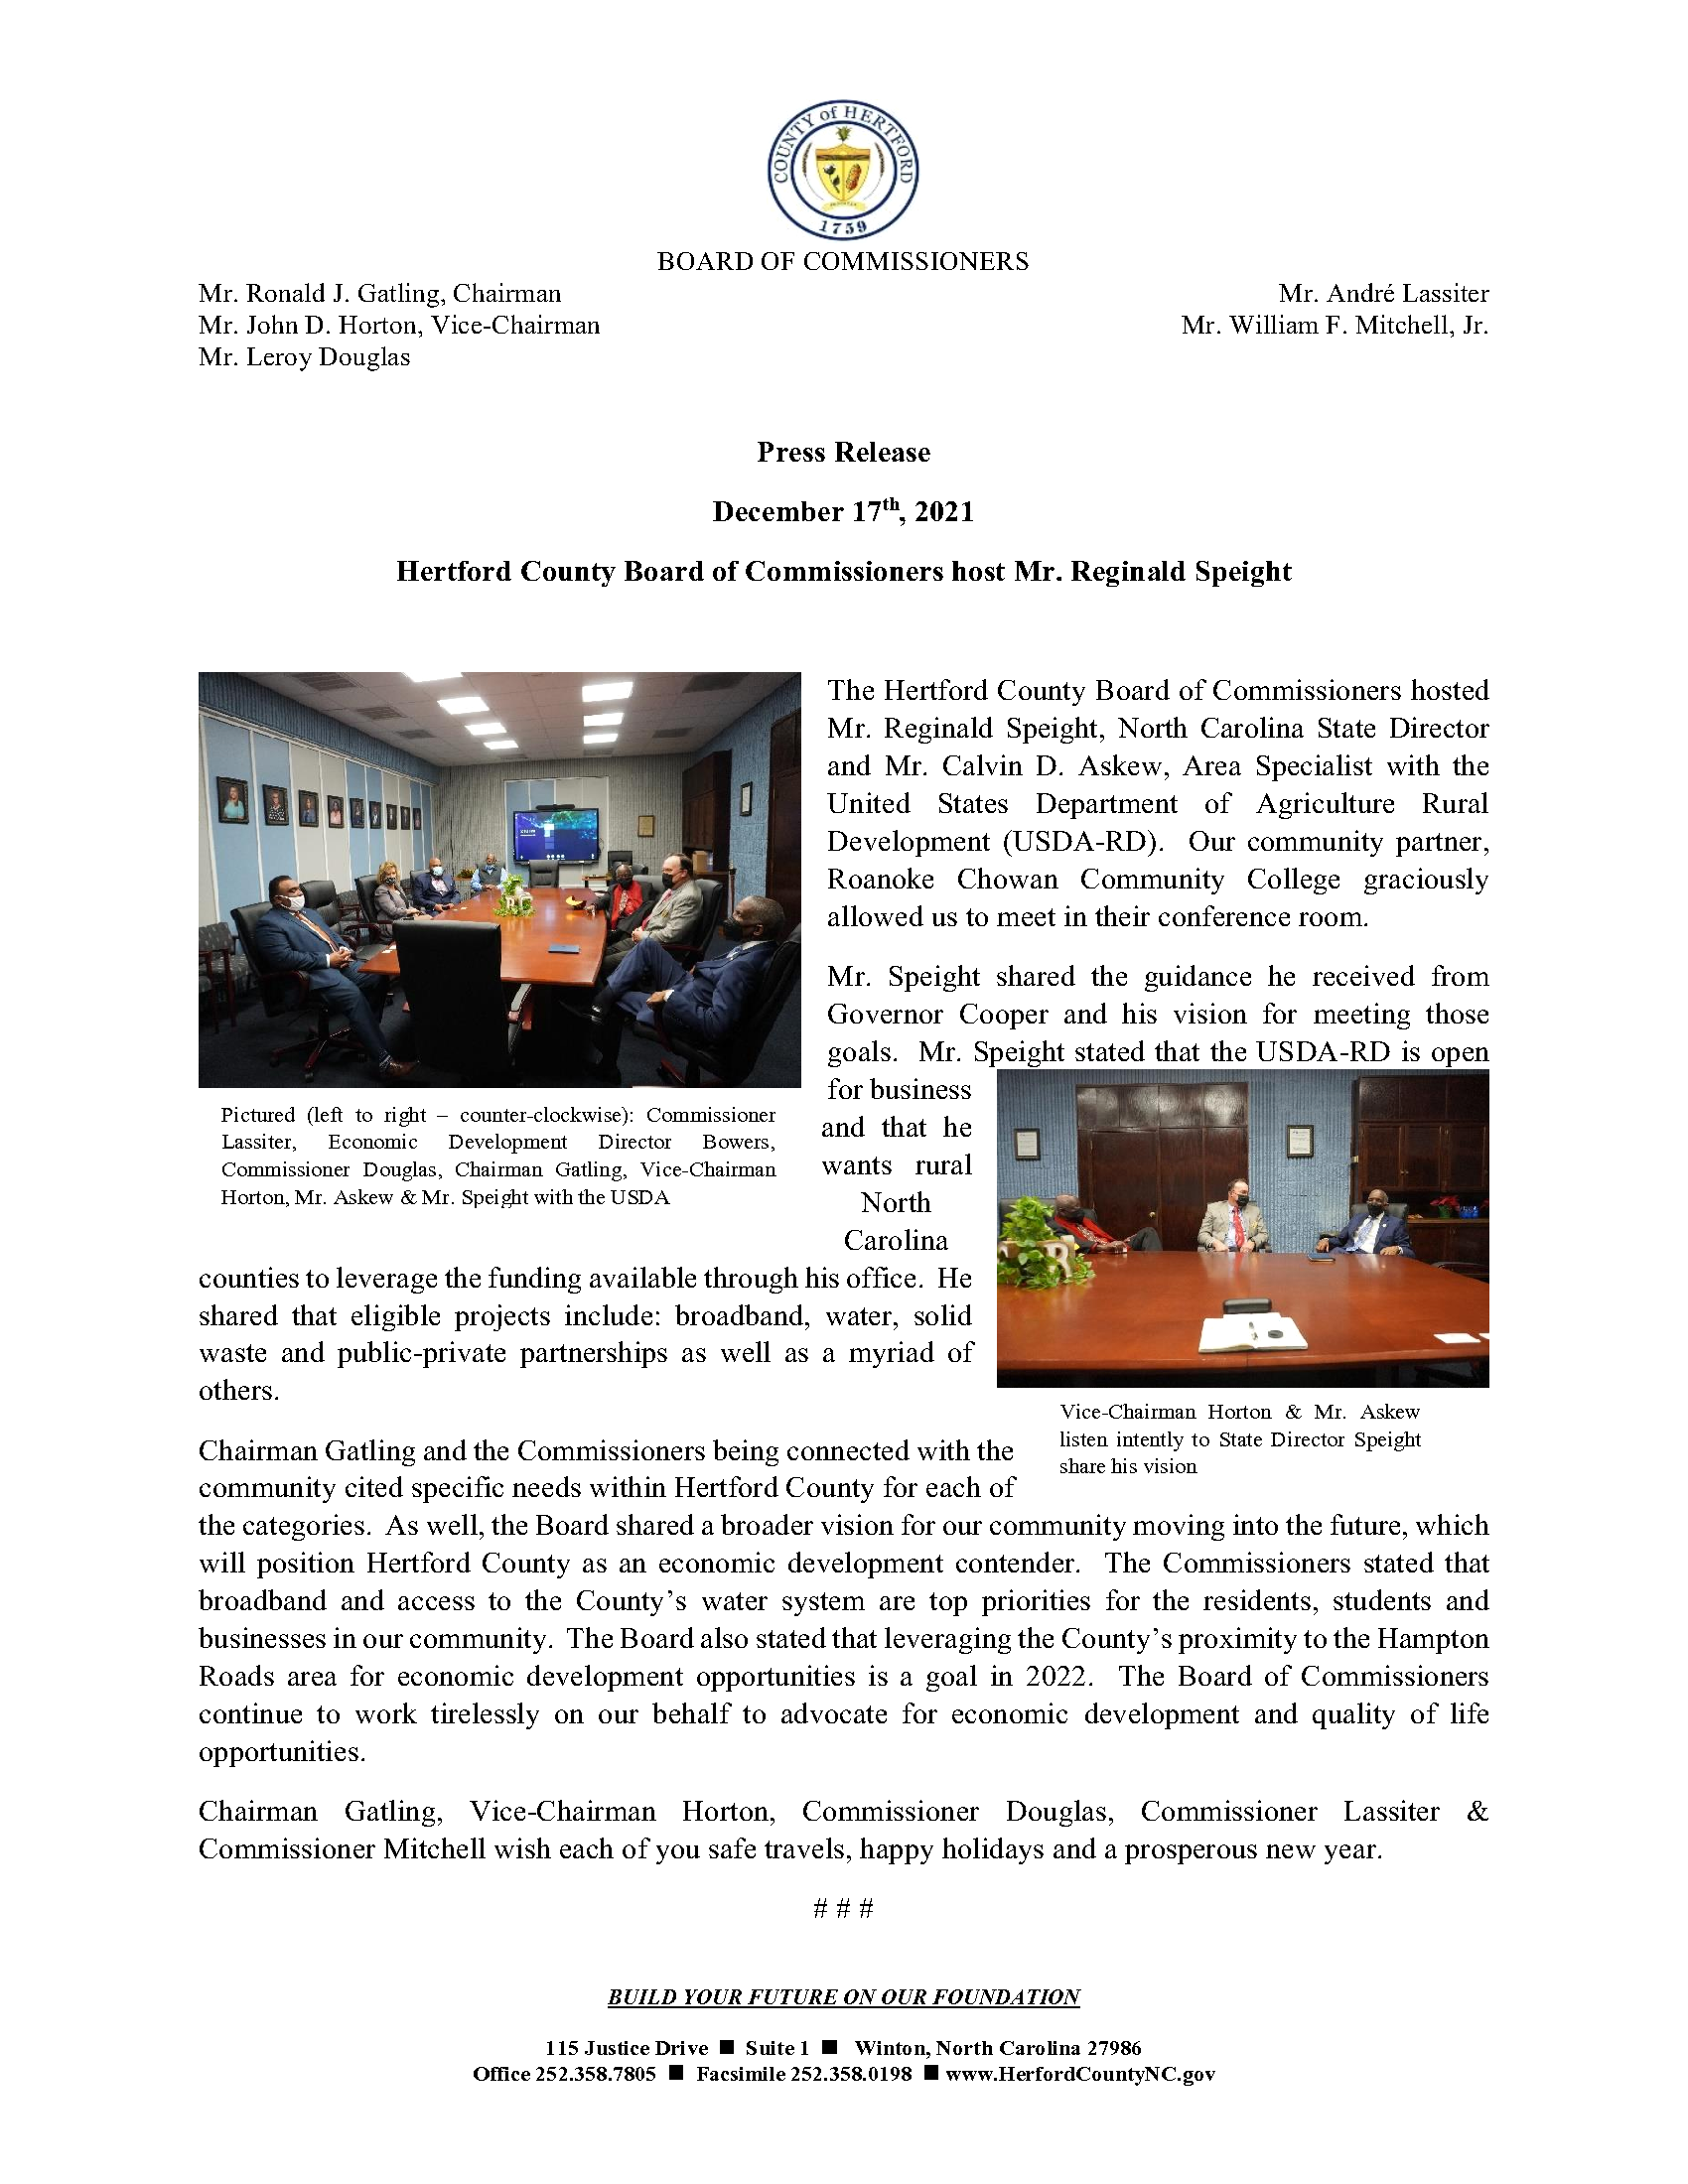 Hertford County Board of Commissioners Host Reginald Speight USDA Press Release_1